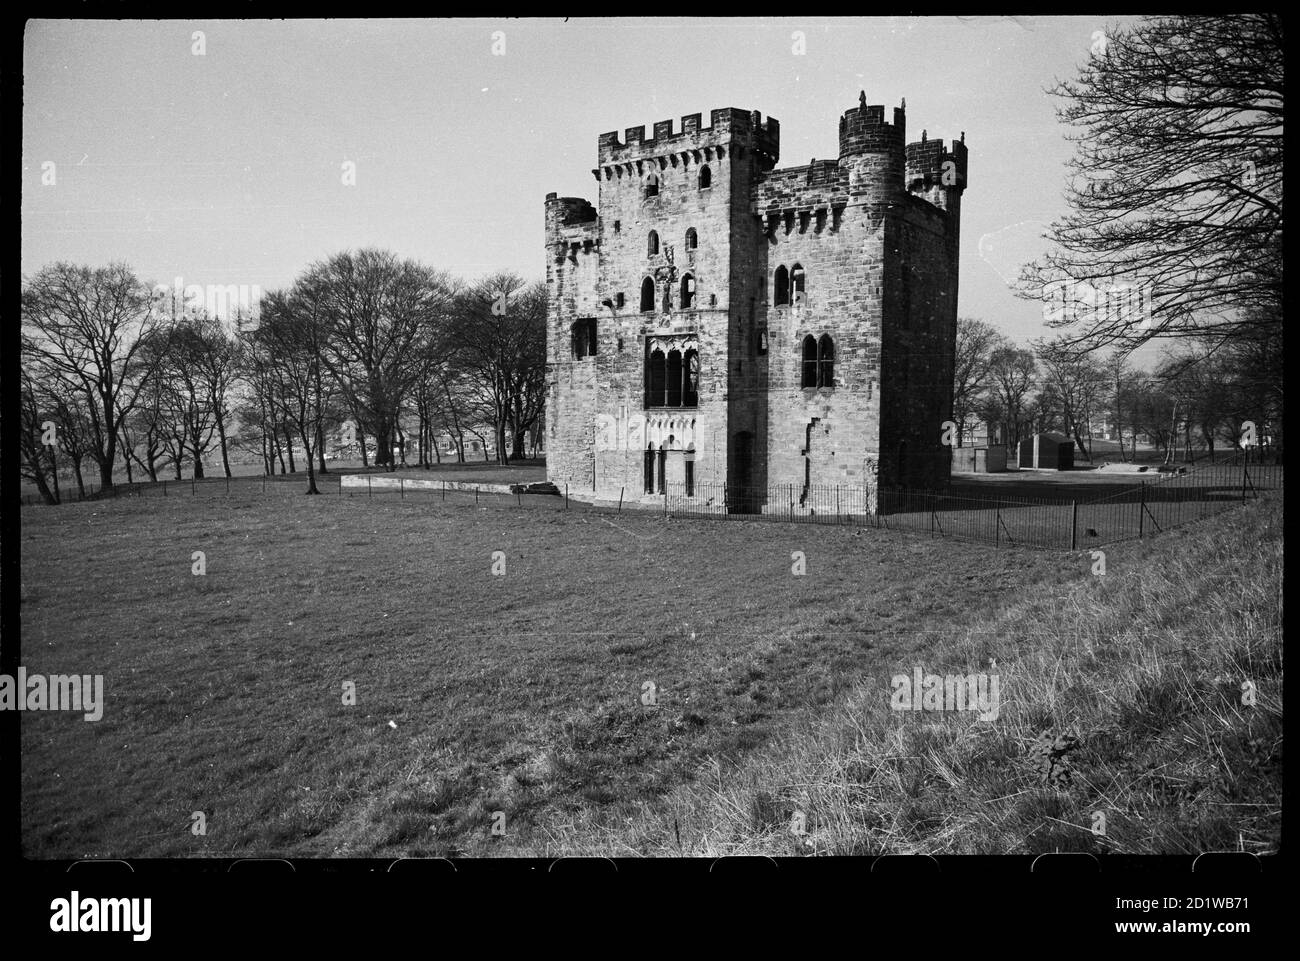 Hylton Castle, Sunderland. An exterior view of Hylton Castle, seen from the north-east and showing the east elevation of the fortified tower-house. Stock Photo